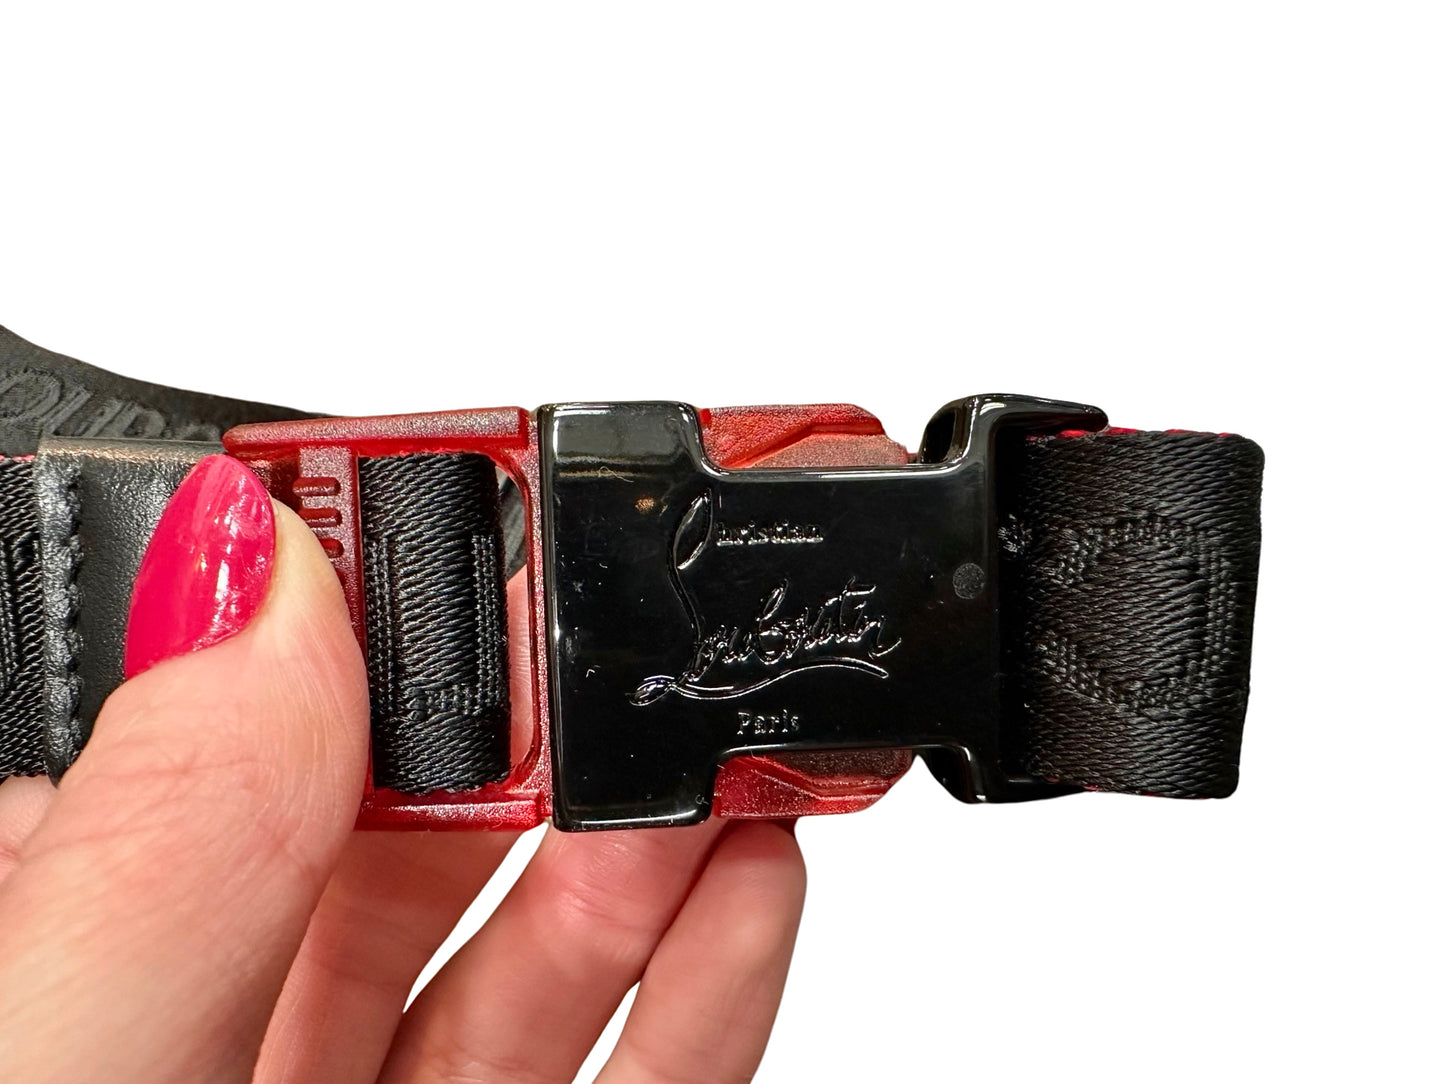 Black belt buckle with Christian Louboutin on it